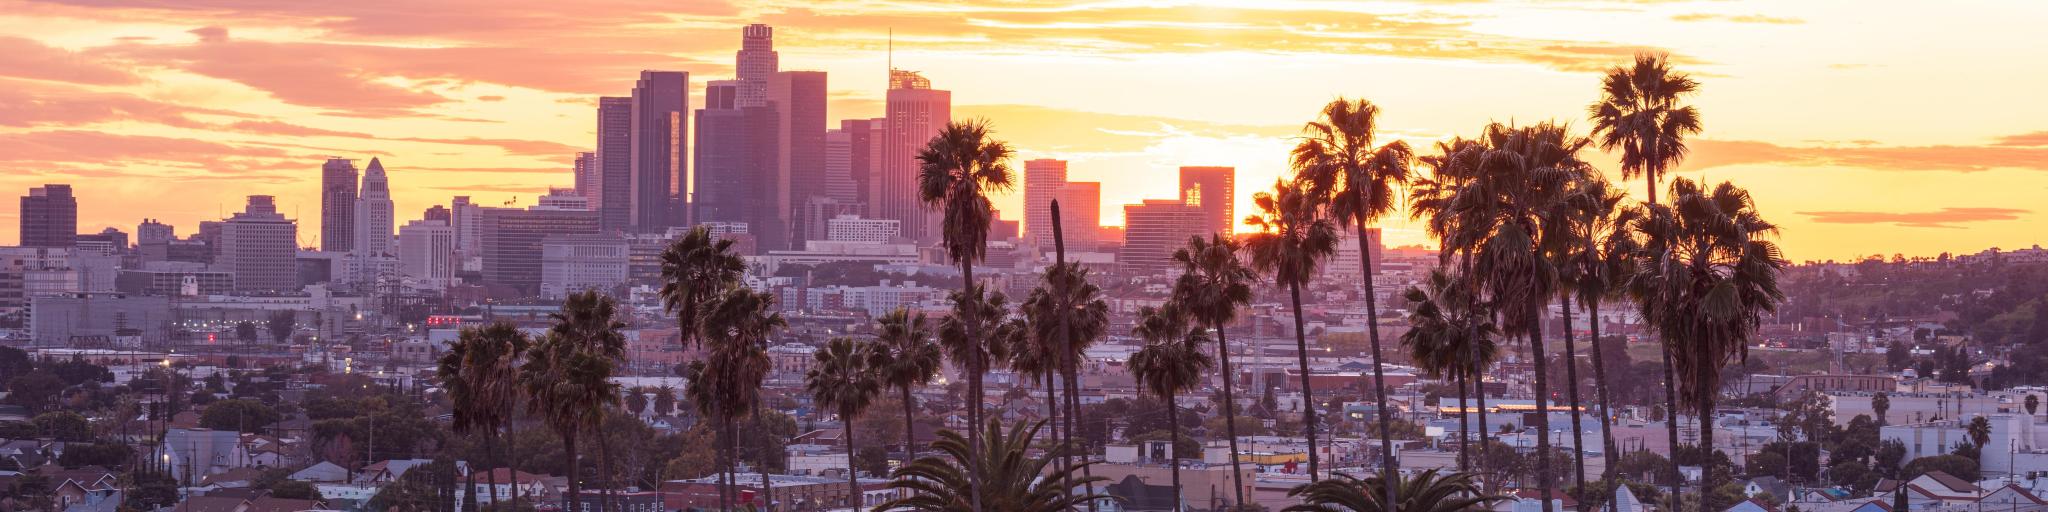 Los Angeles, California, USA with a beautiful sunset through the palm trees and city skyline in the distance.